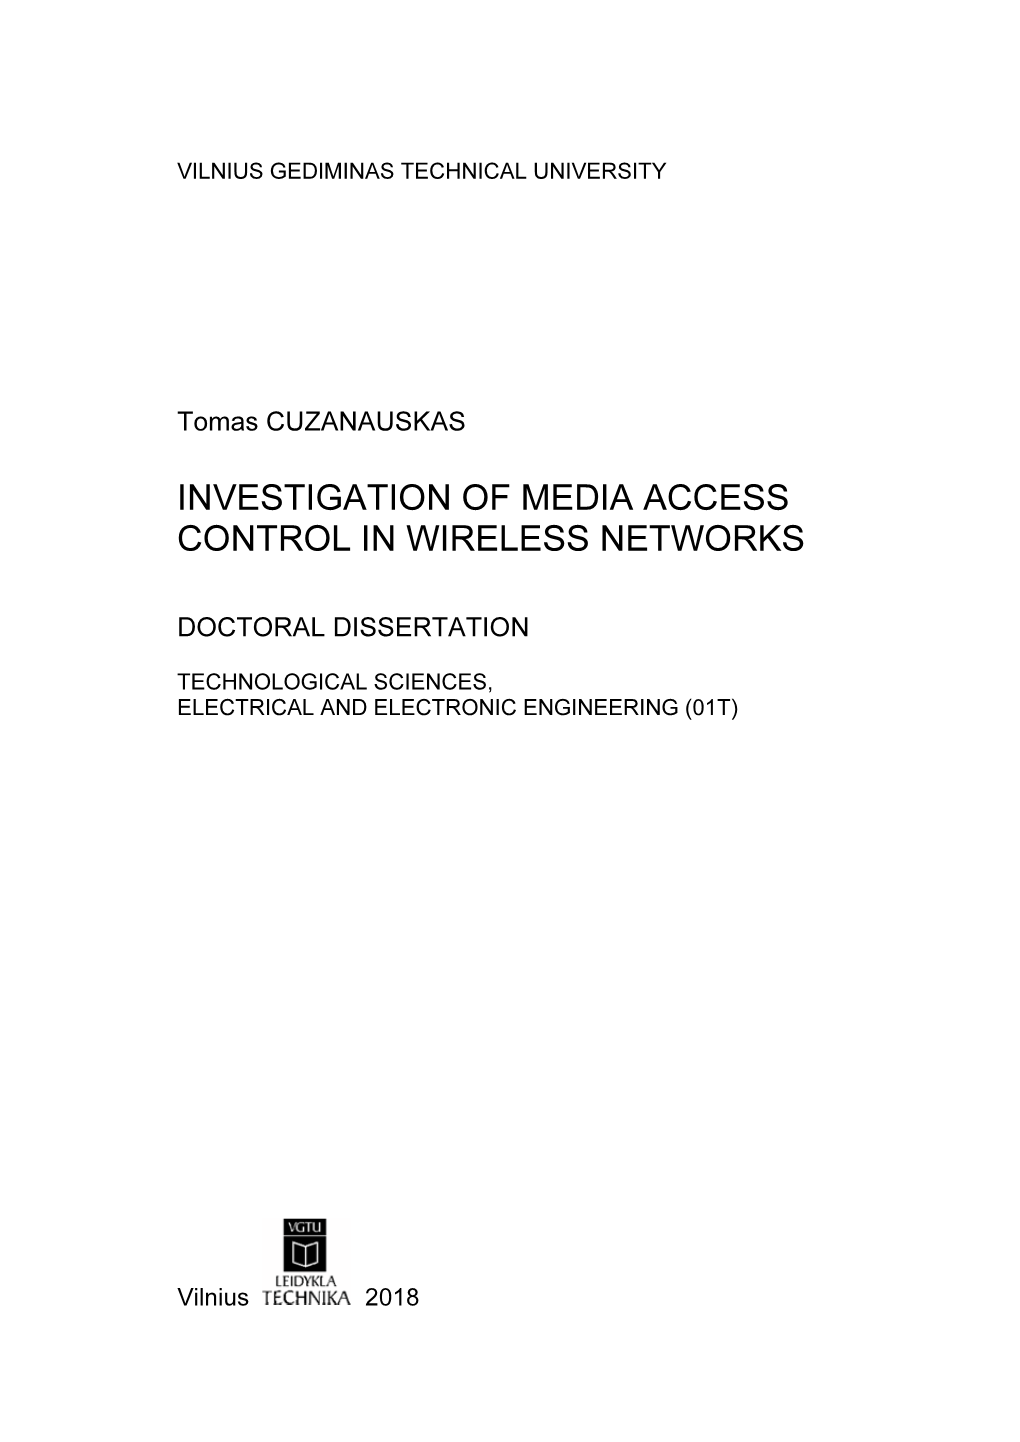 Investigation of Media Access Control in Wireless Networks